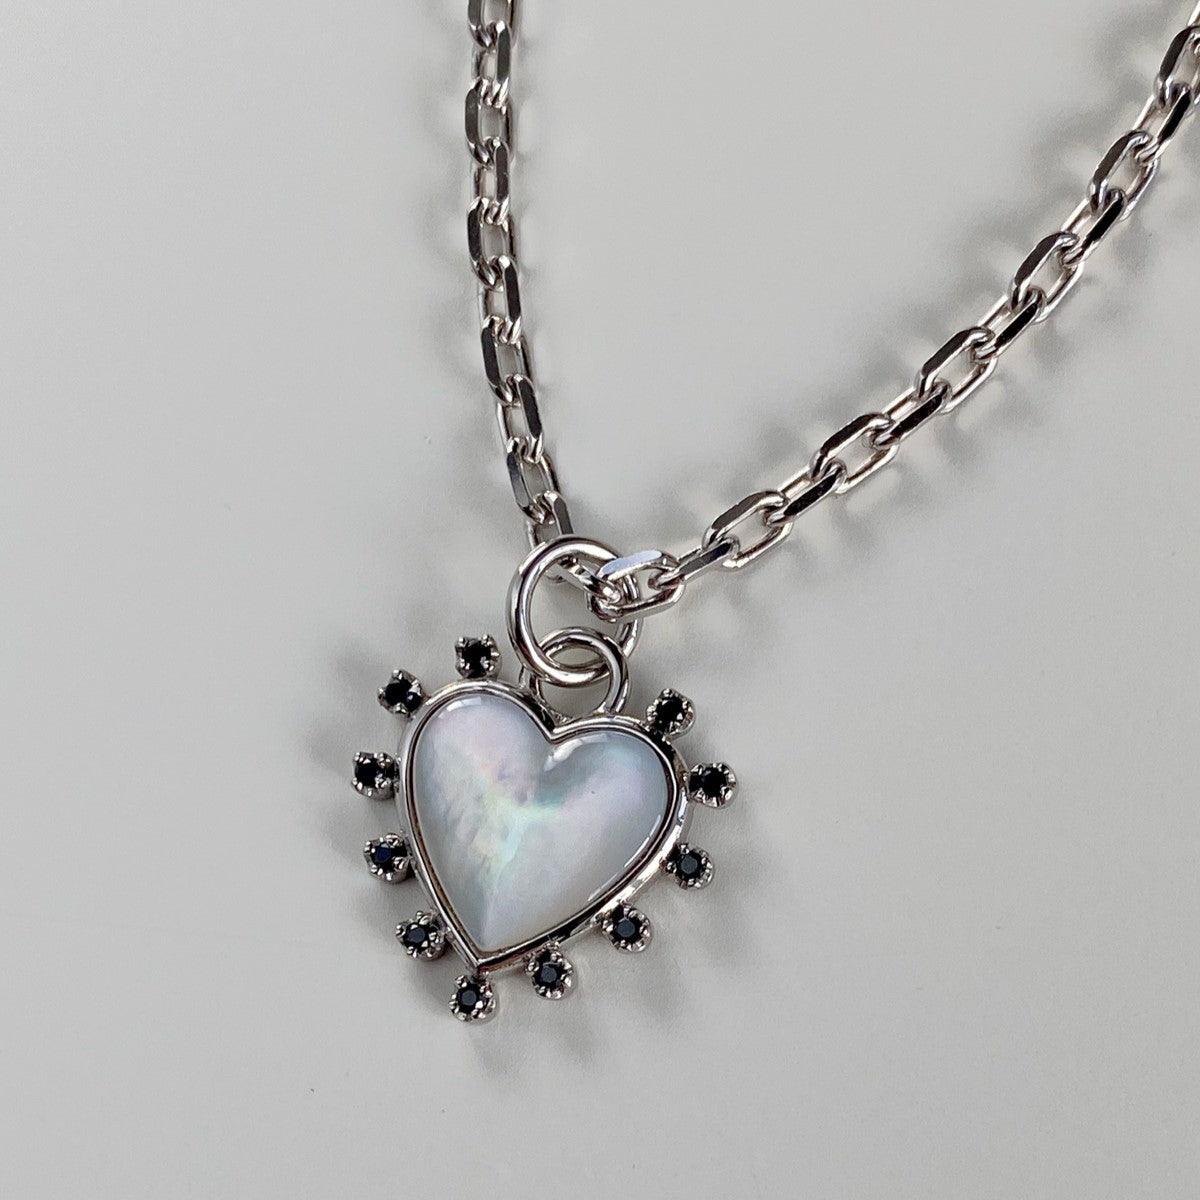 PENDANT "HEART" WITH MOTHER-OF-PEARL CAMEO & BLACK SPINEL ON A CHAIN / SILVER